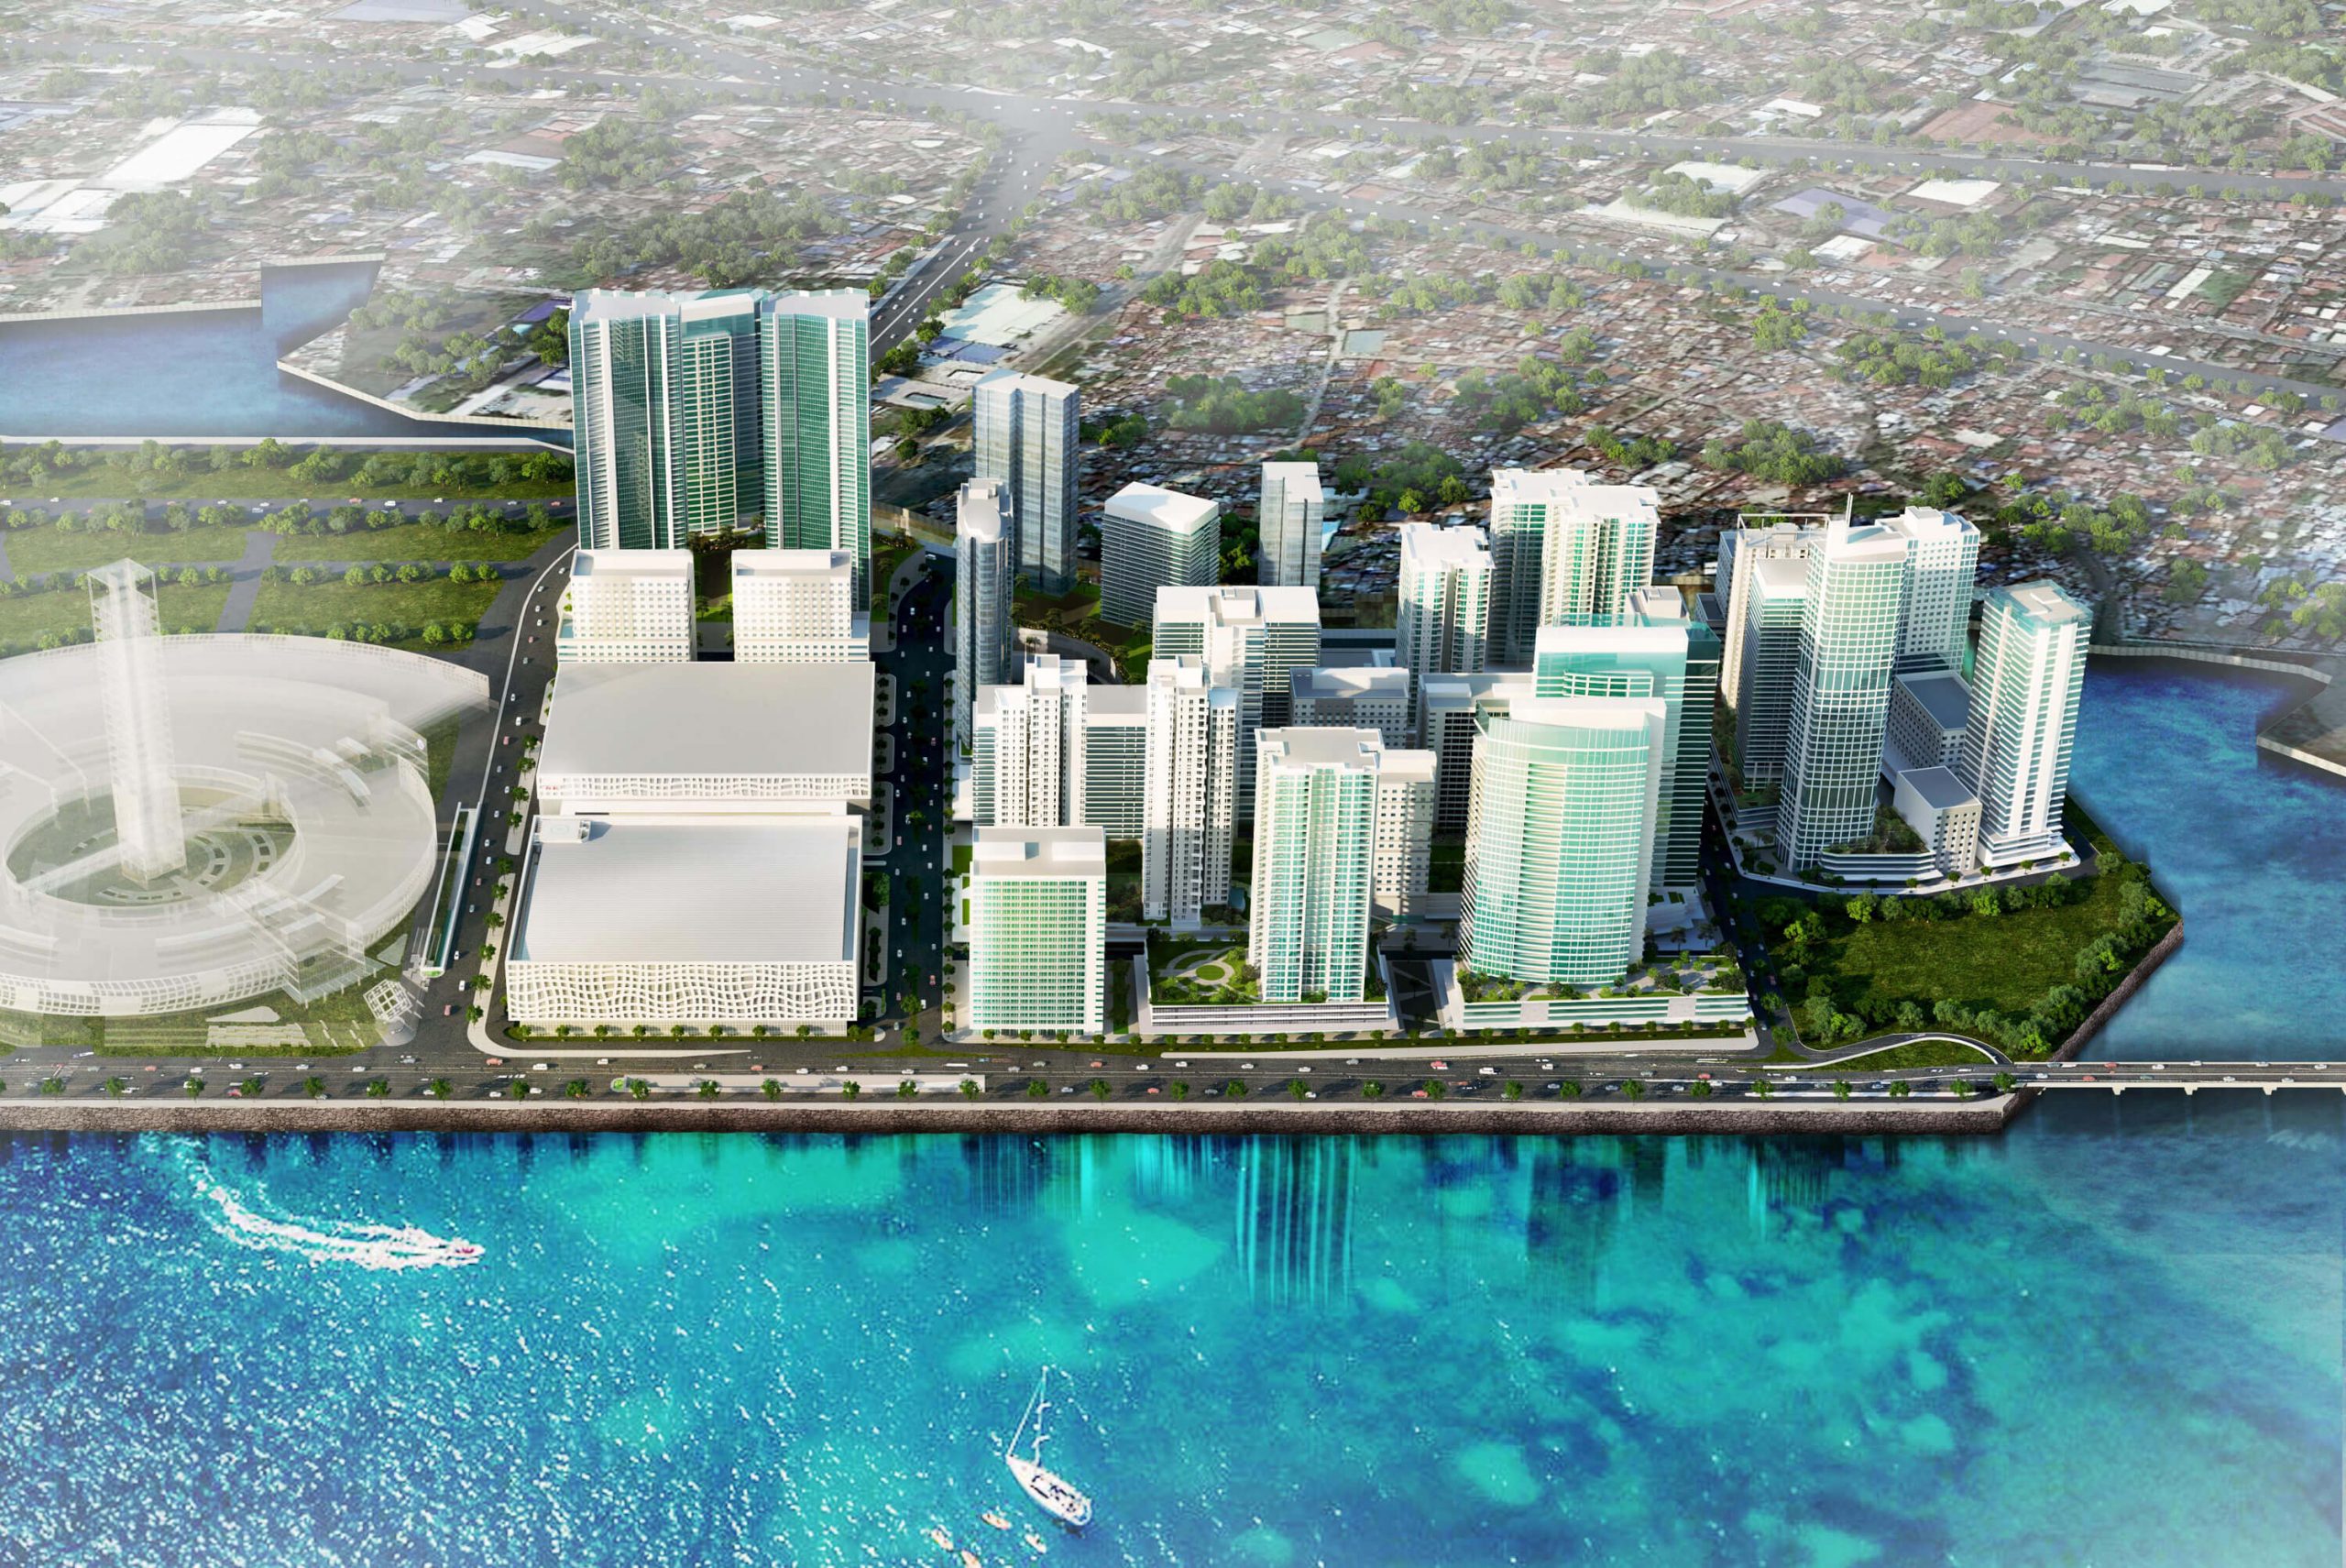 SOUTH COAST CITY - SM-AYALA SRP DEVELOPMENT. The 26-hectare waterside development will be home to prime entertainment and commercial concepts and will be complemented by other mixed-uses to serve diverse market needs.